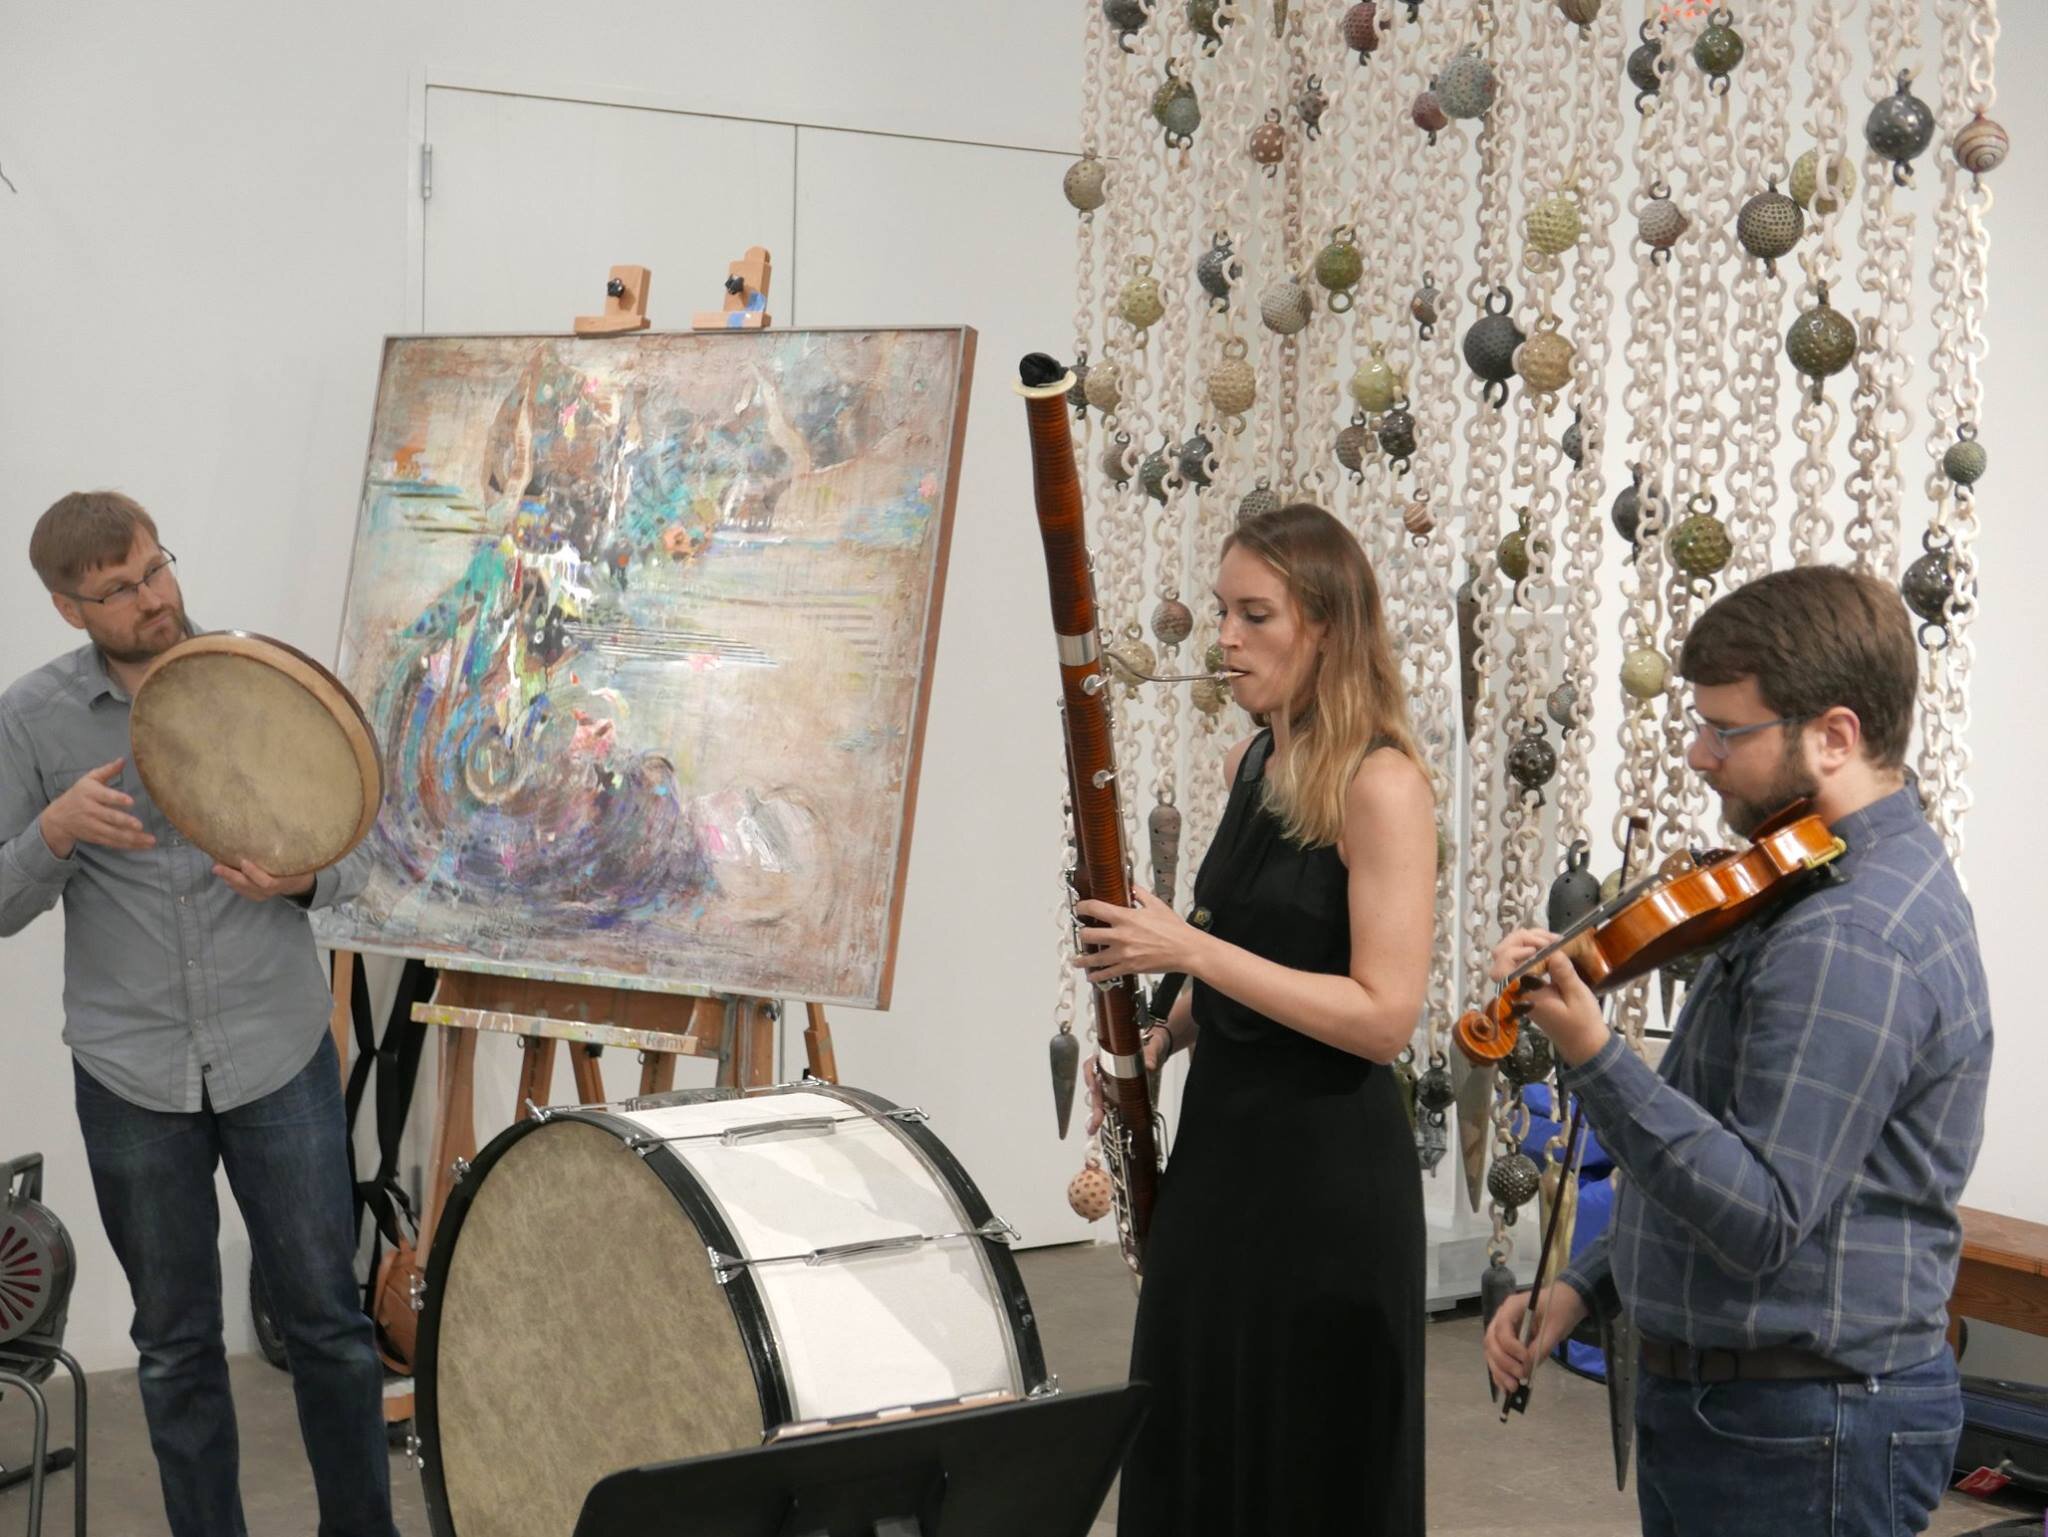 A Percussionist, bassonnist, and violinist performing in front of artwork